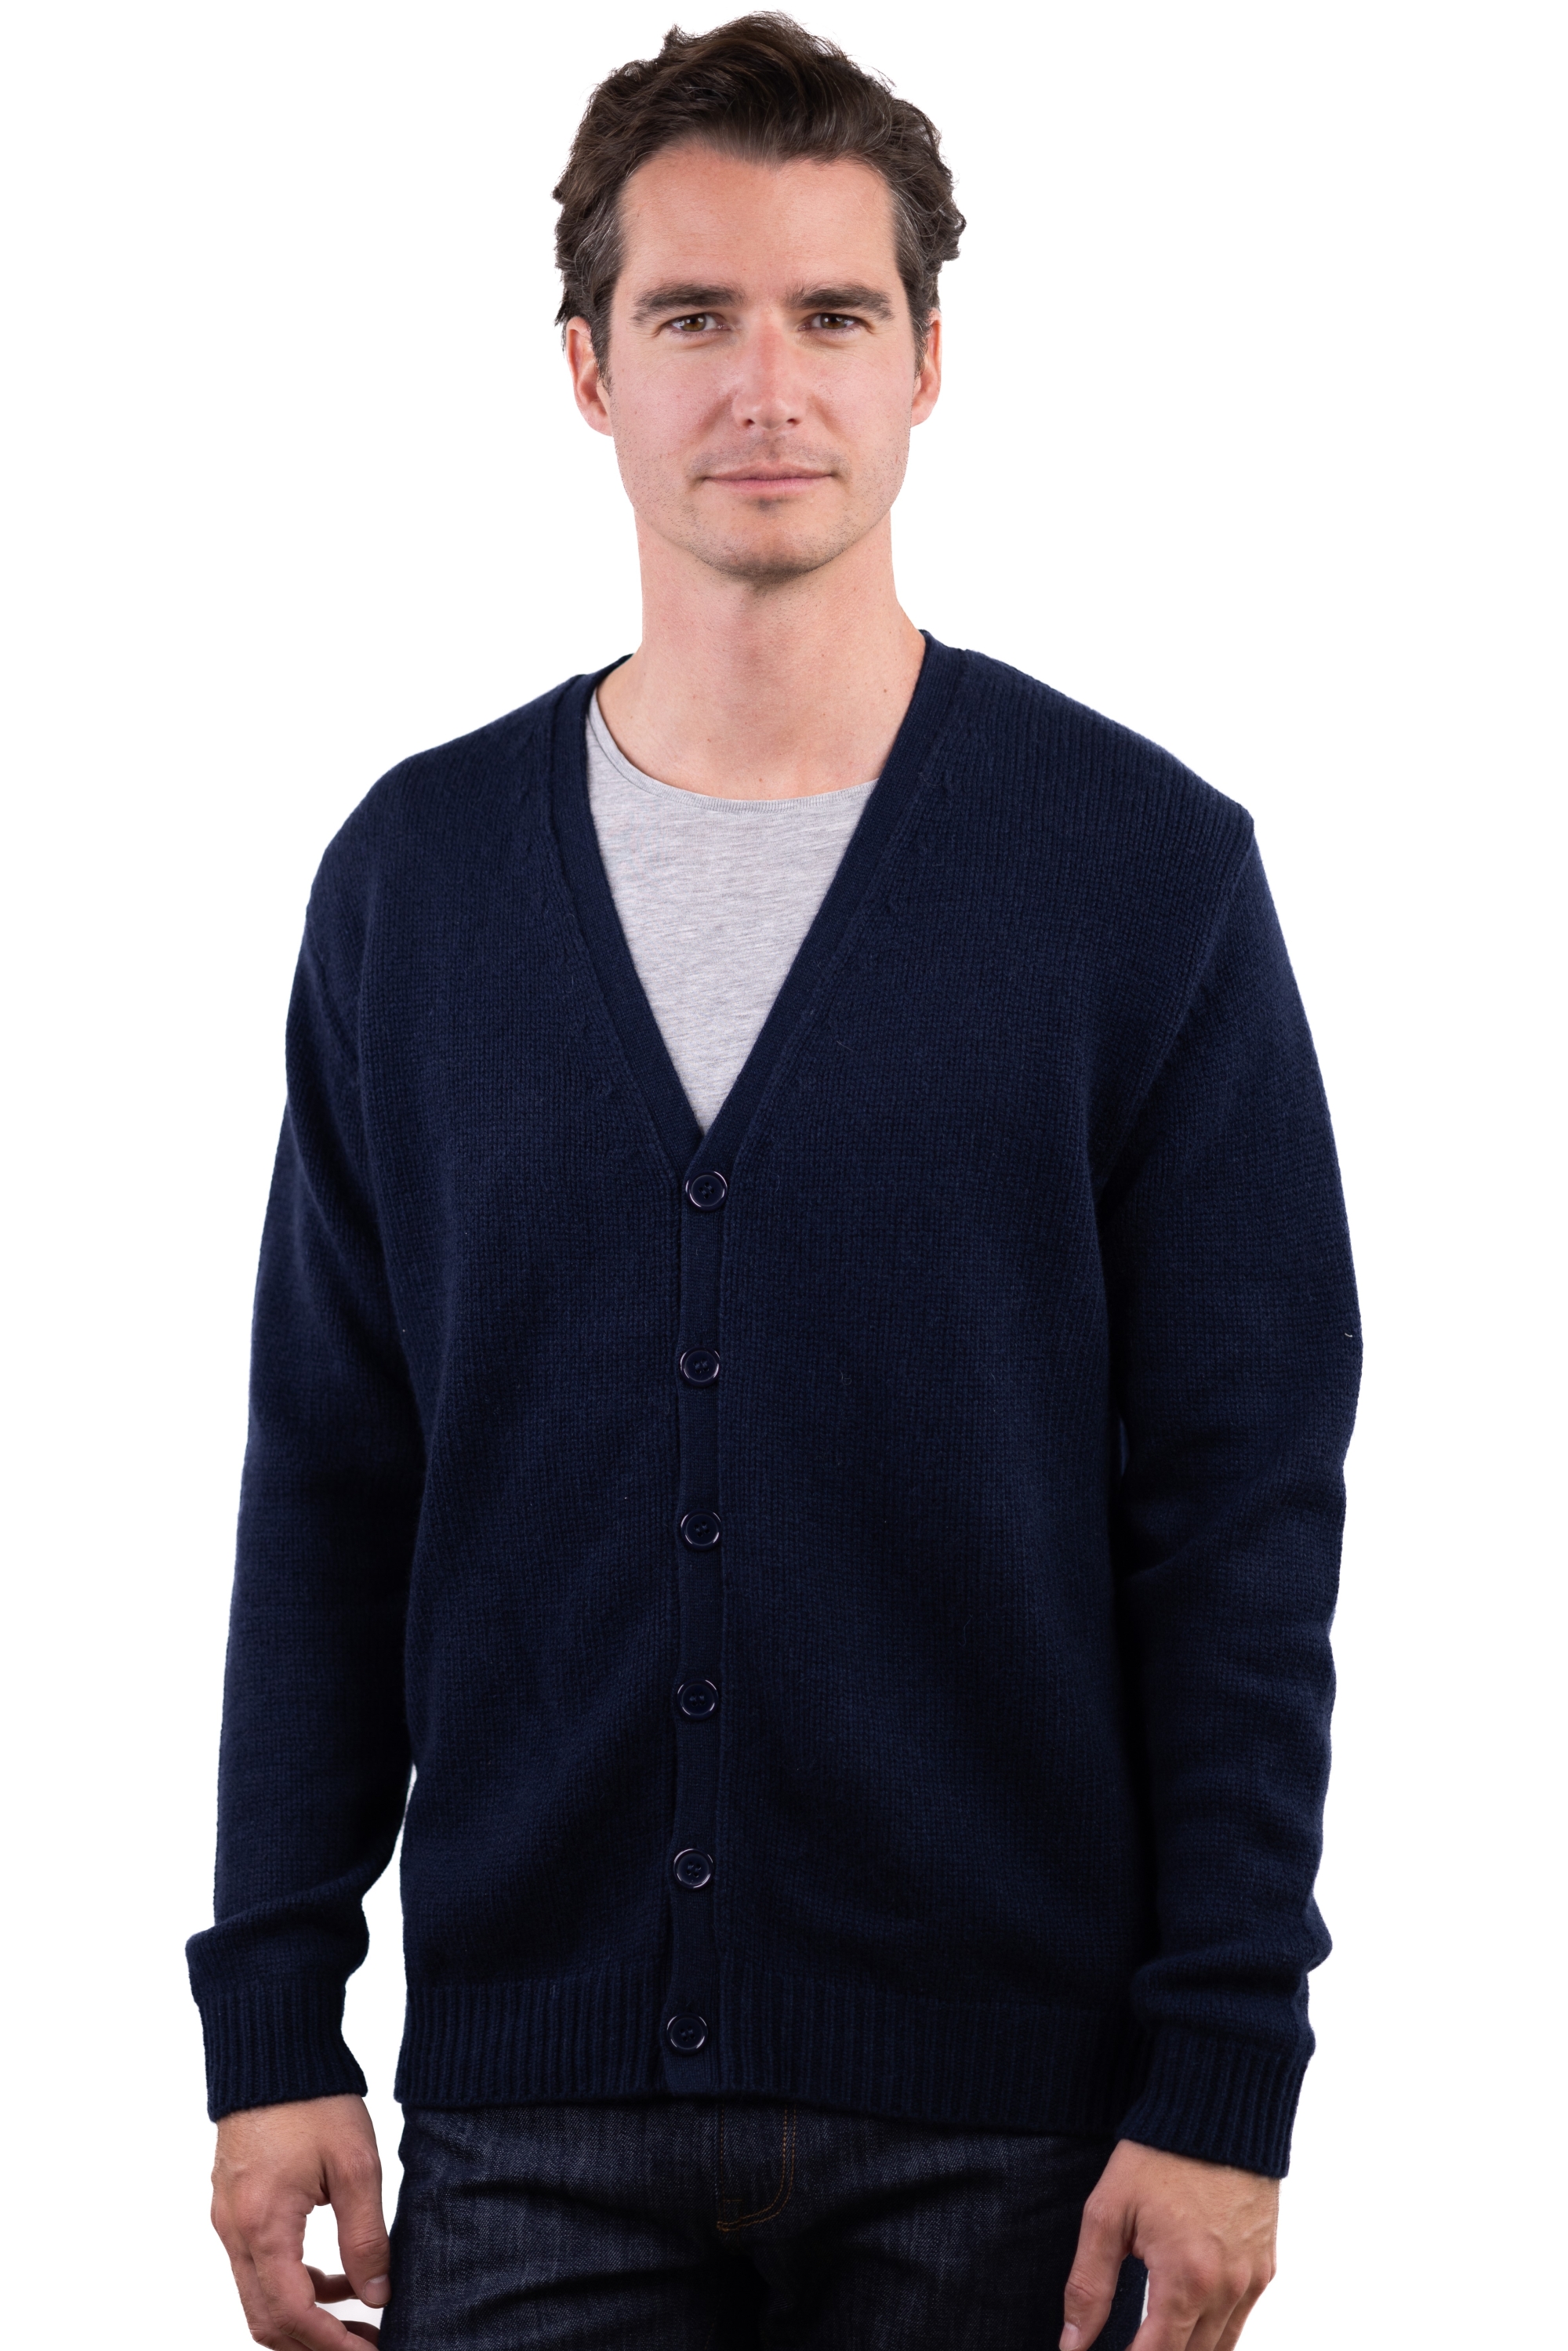 Cachemire pull homme aden marine fonce 3xl